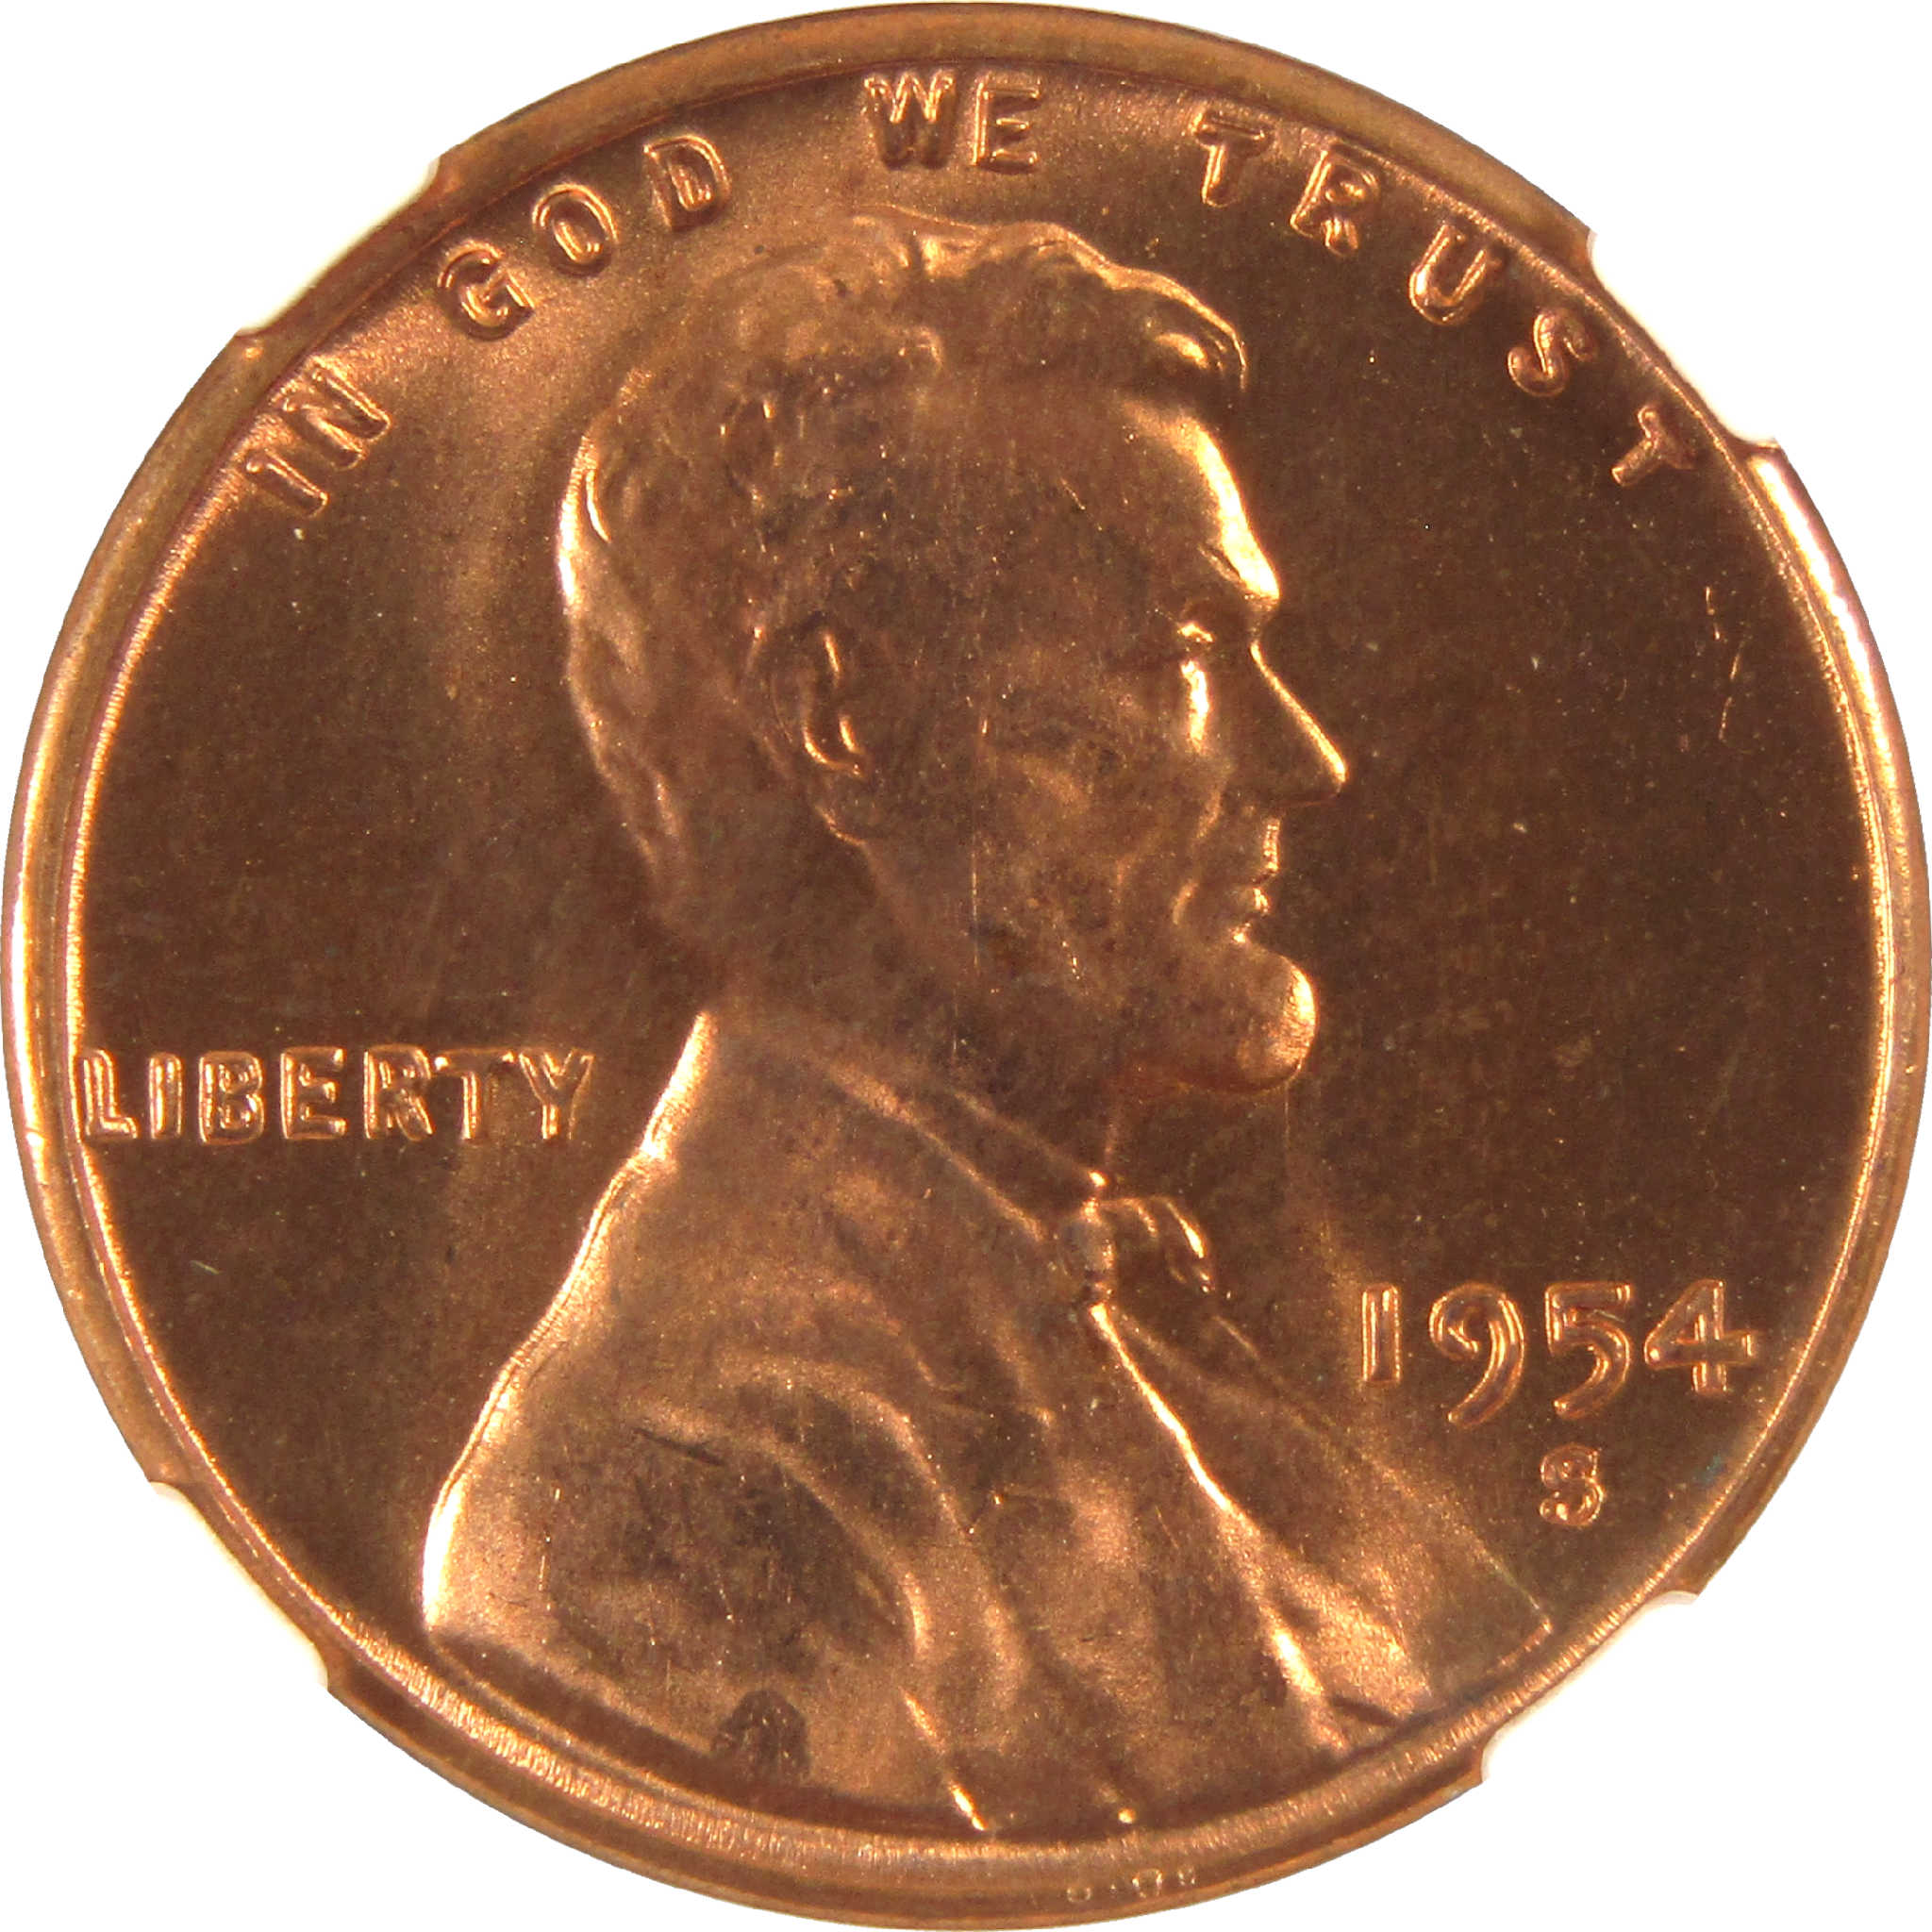 1954 S Lincoln Wheat Cent MS 66 RD NGC Penny 1c Unc SKU:I11578